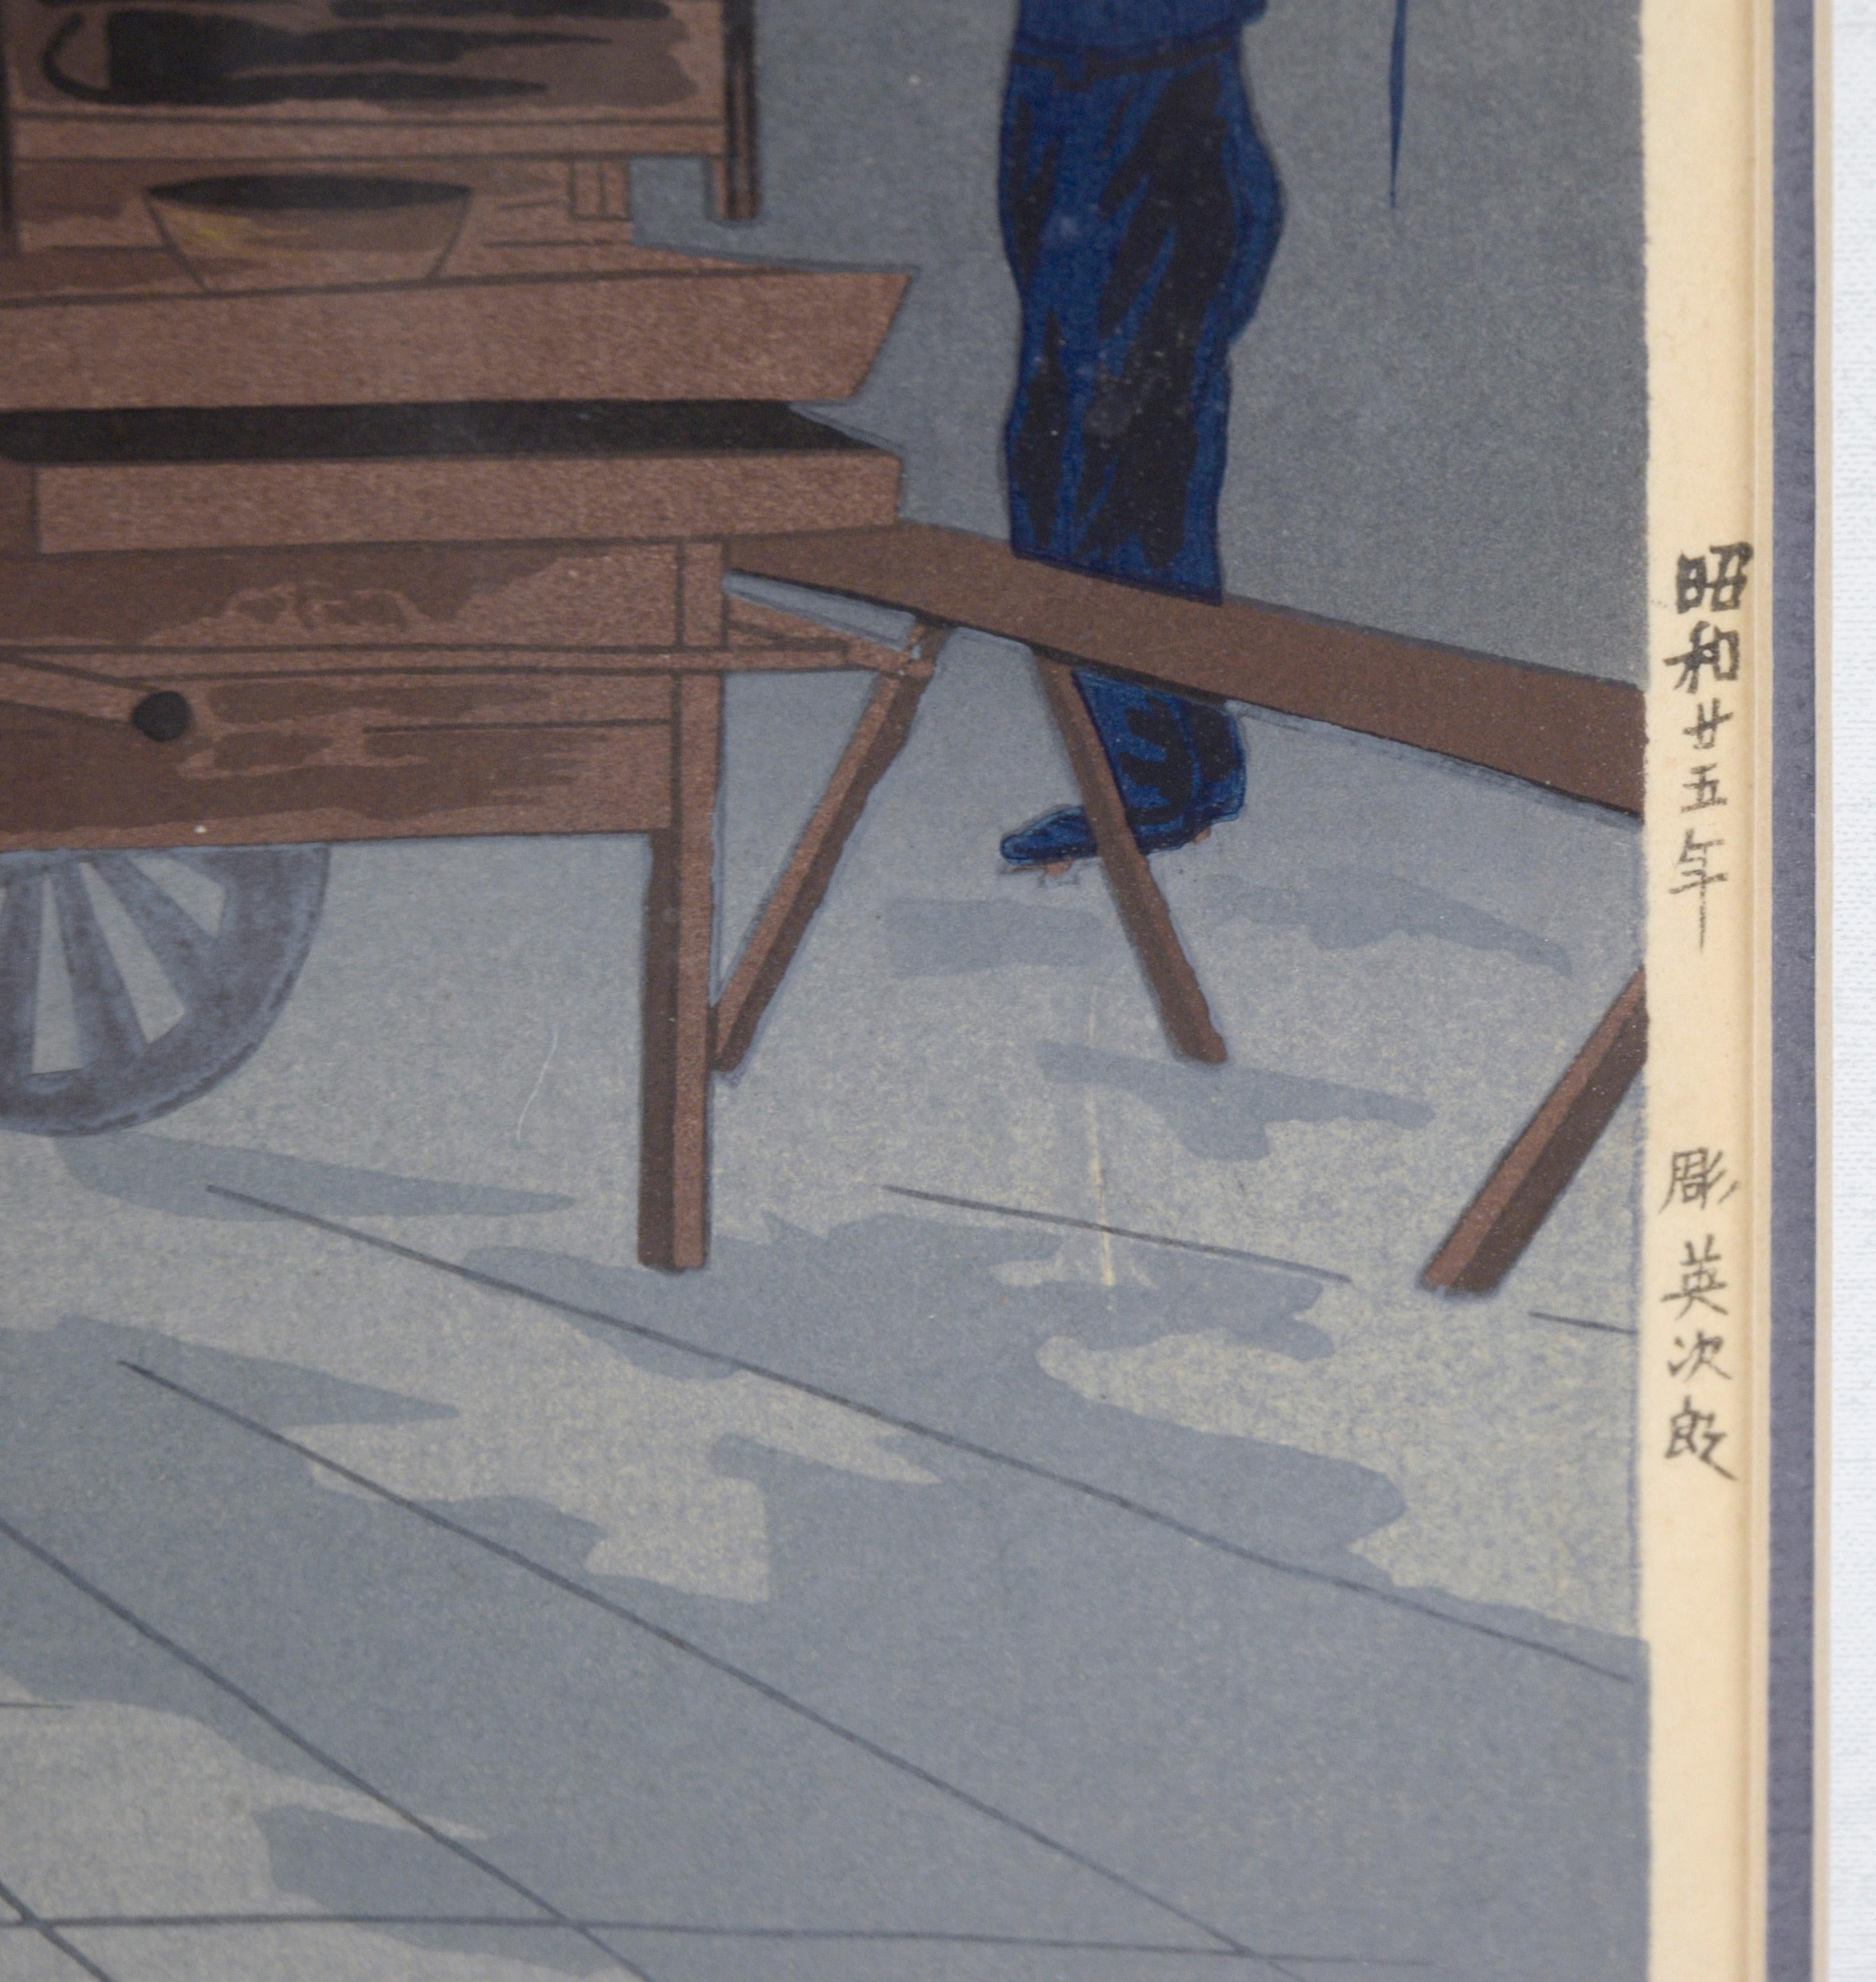 Soba Noodle Vendor Cart at Night - Japanese Woodblock in Ink on Paper

Clean and balanced depiction of  noodle cart by Tomikichiro Tokuriki (Japanese, 1902-1999). The noodle cart is front and center, in full color, with a faint glow emanating from